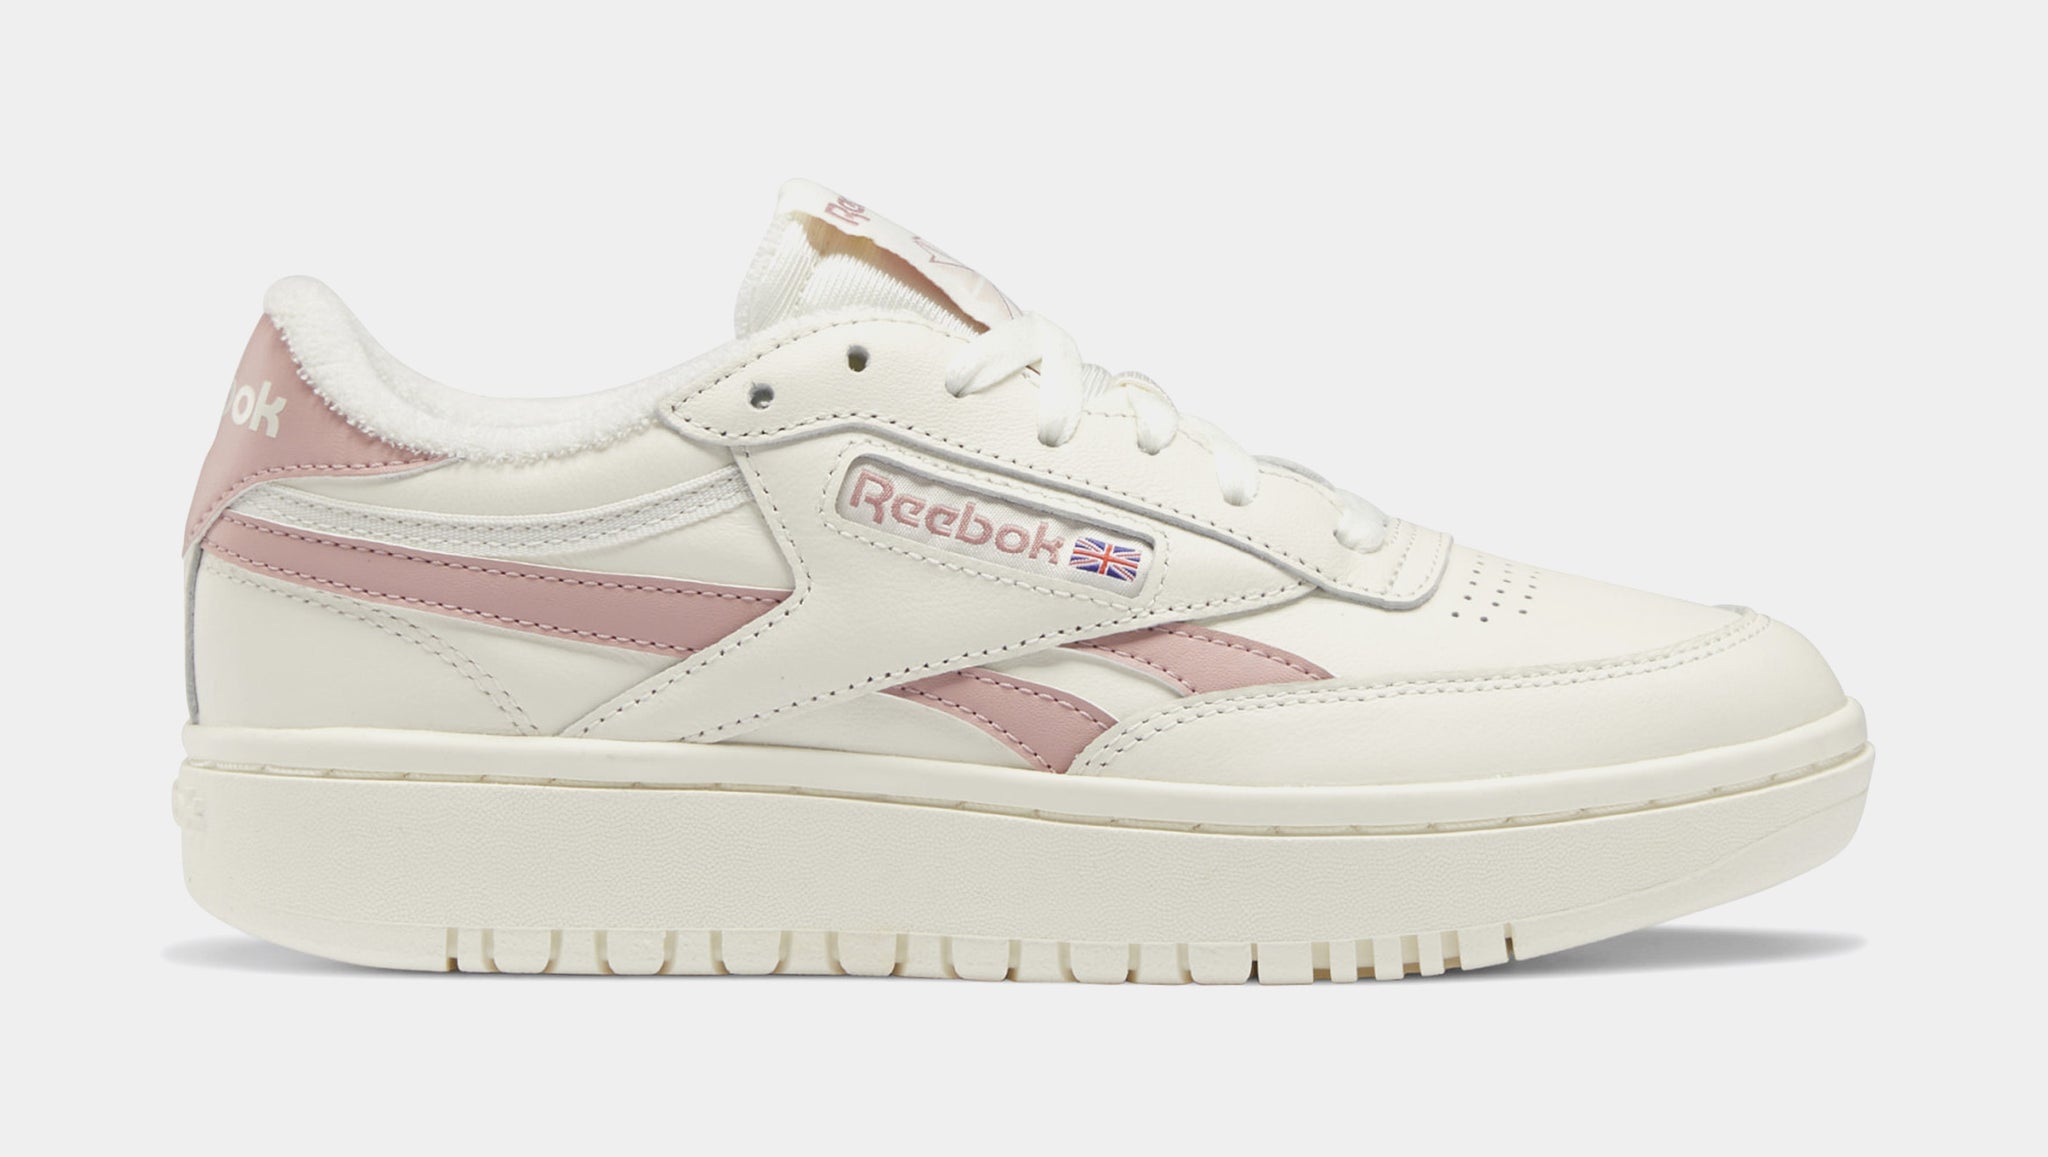 Indigenous Aggressiv Rejse Reebok Club C Double Womens Lifestyle Shoes White Pink GY4802 – Shoe Palace